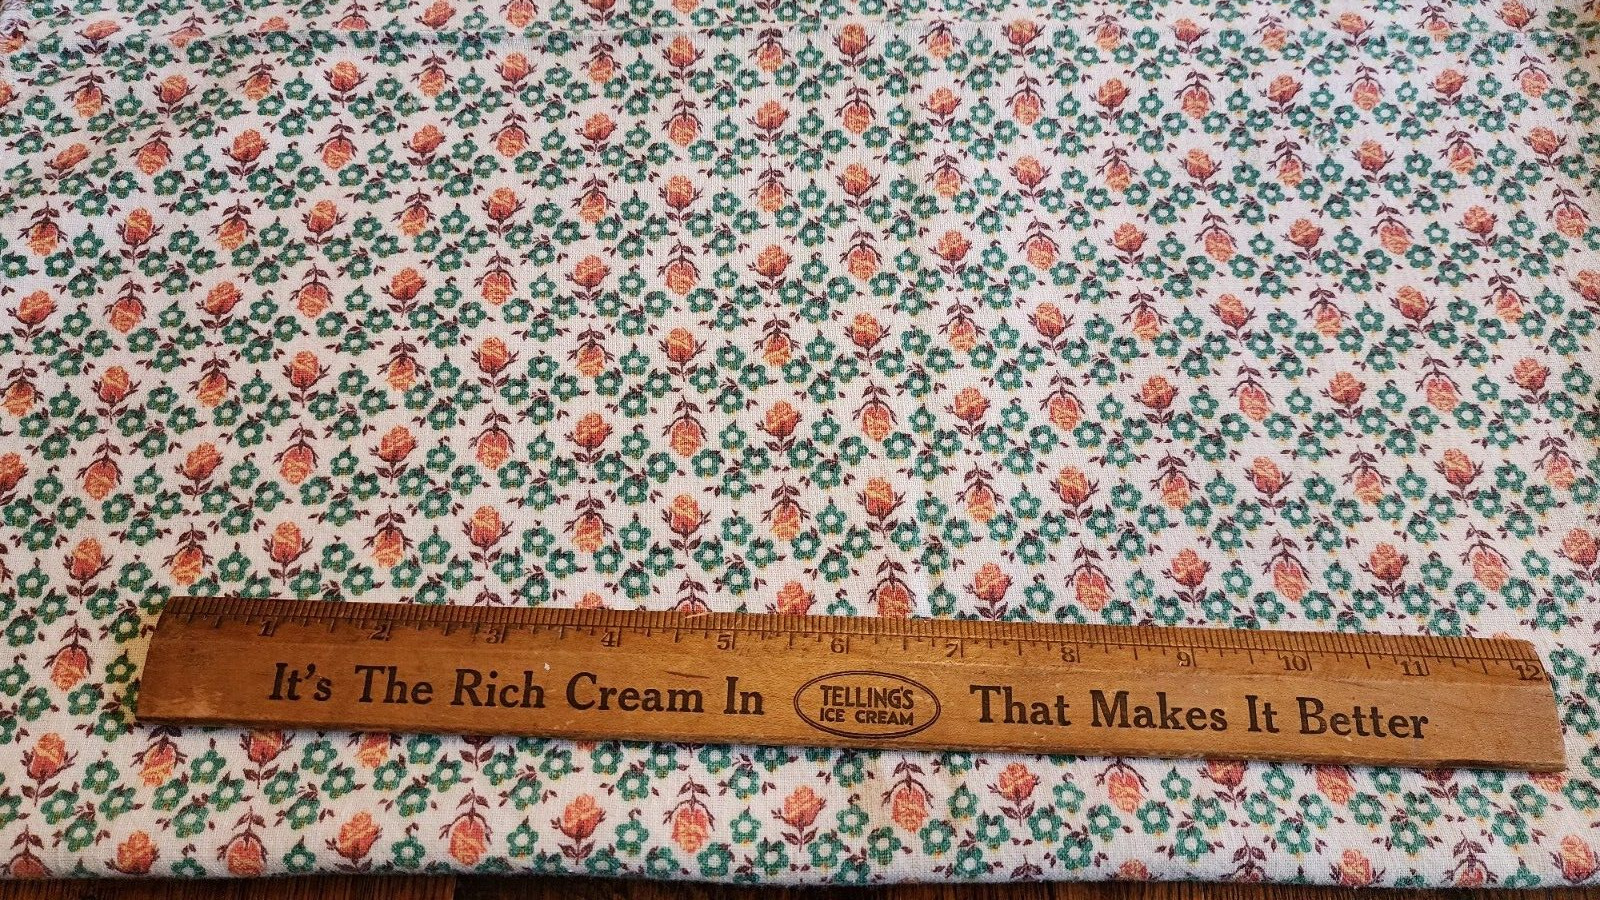 Vintage Feed Flour Sack Fabric Small Orange Brown Green Flowers Floral 19x42